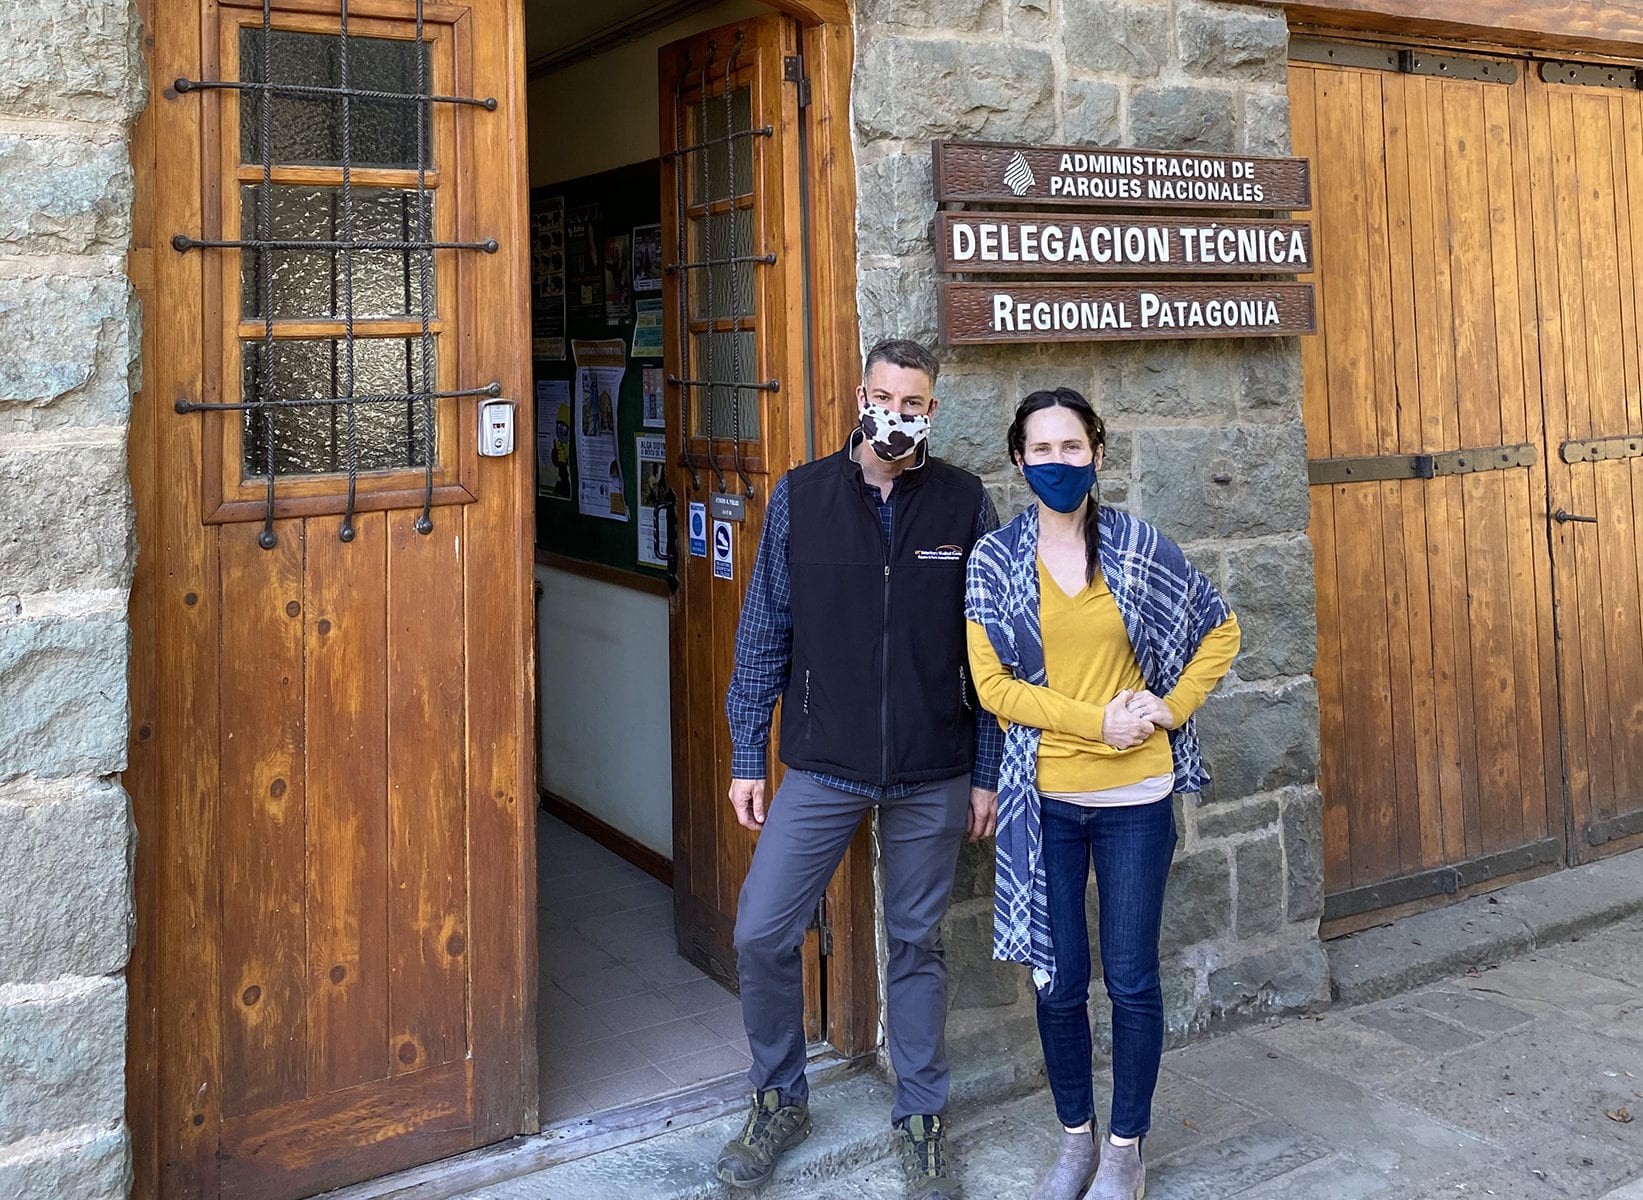 Sara Mulville, UT Smith Center for Sustainable International Agriculture, and Ricardo Videla, UT College of Veterinary Medicine, at the National Parks Administration in Northern Patagonia, Argentina.